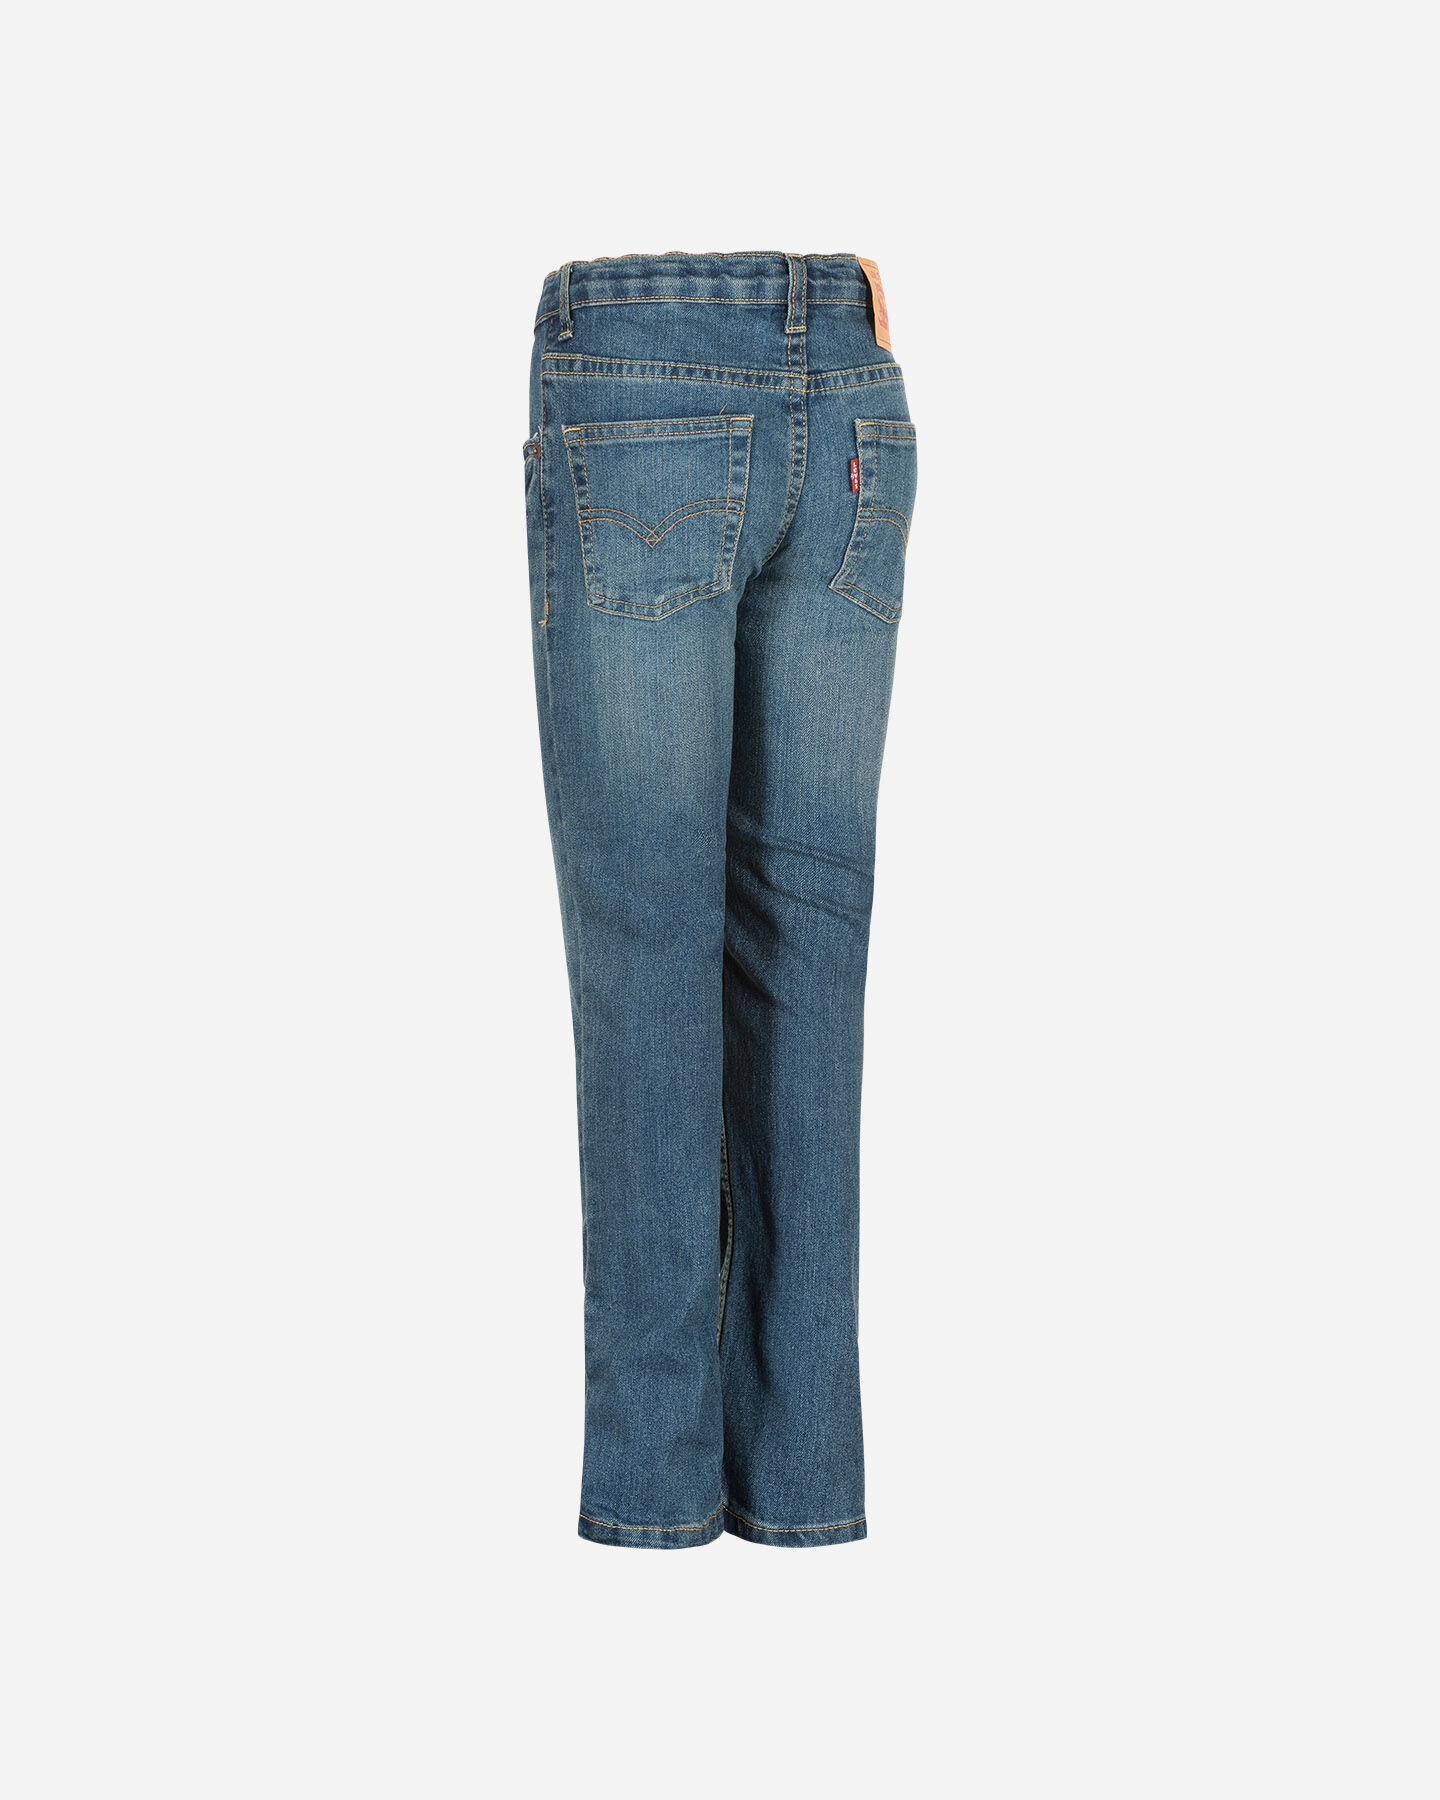  Jeans LEVI'S 511 SLIM JR S4076433|M8N|6A scatto 1